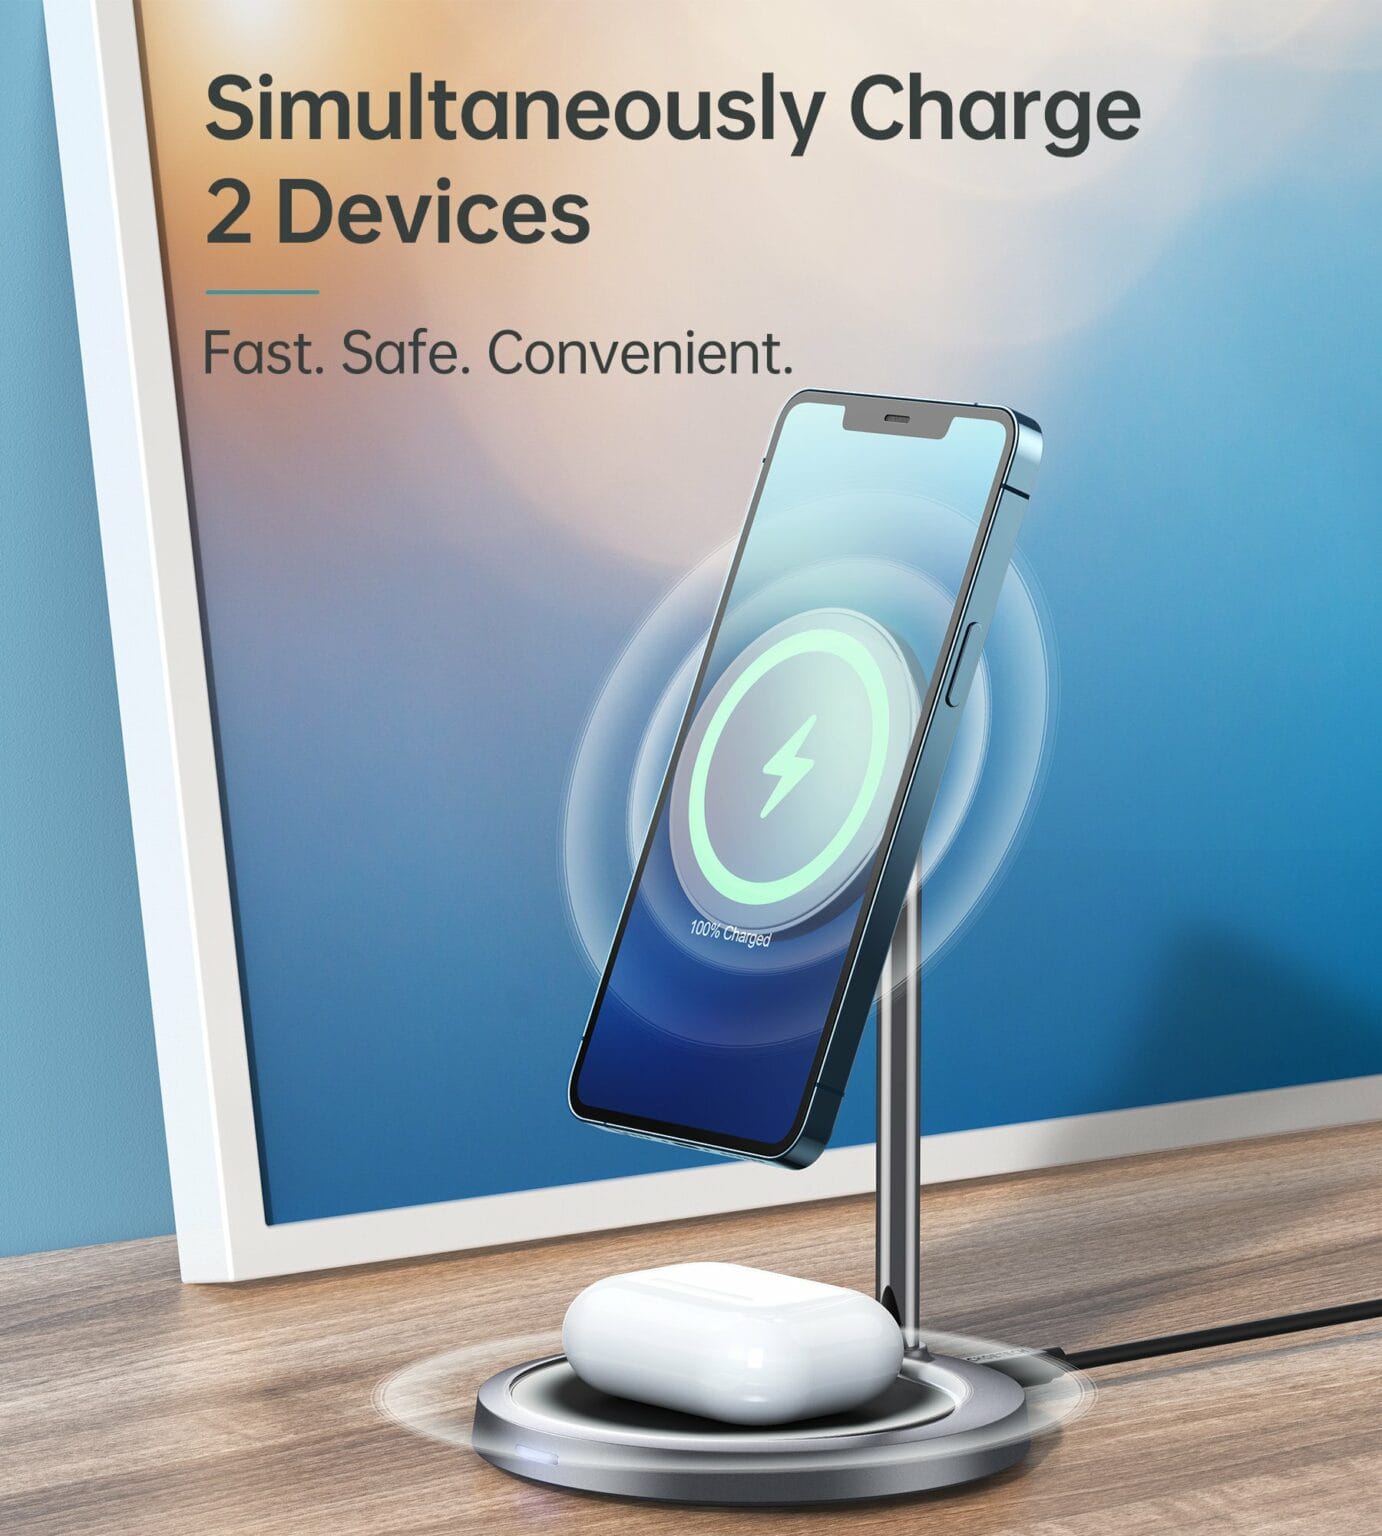 Giveaway: This MagSafe wireless charging stand, charges an iPhone 12 and AirPods at the same time.